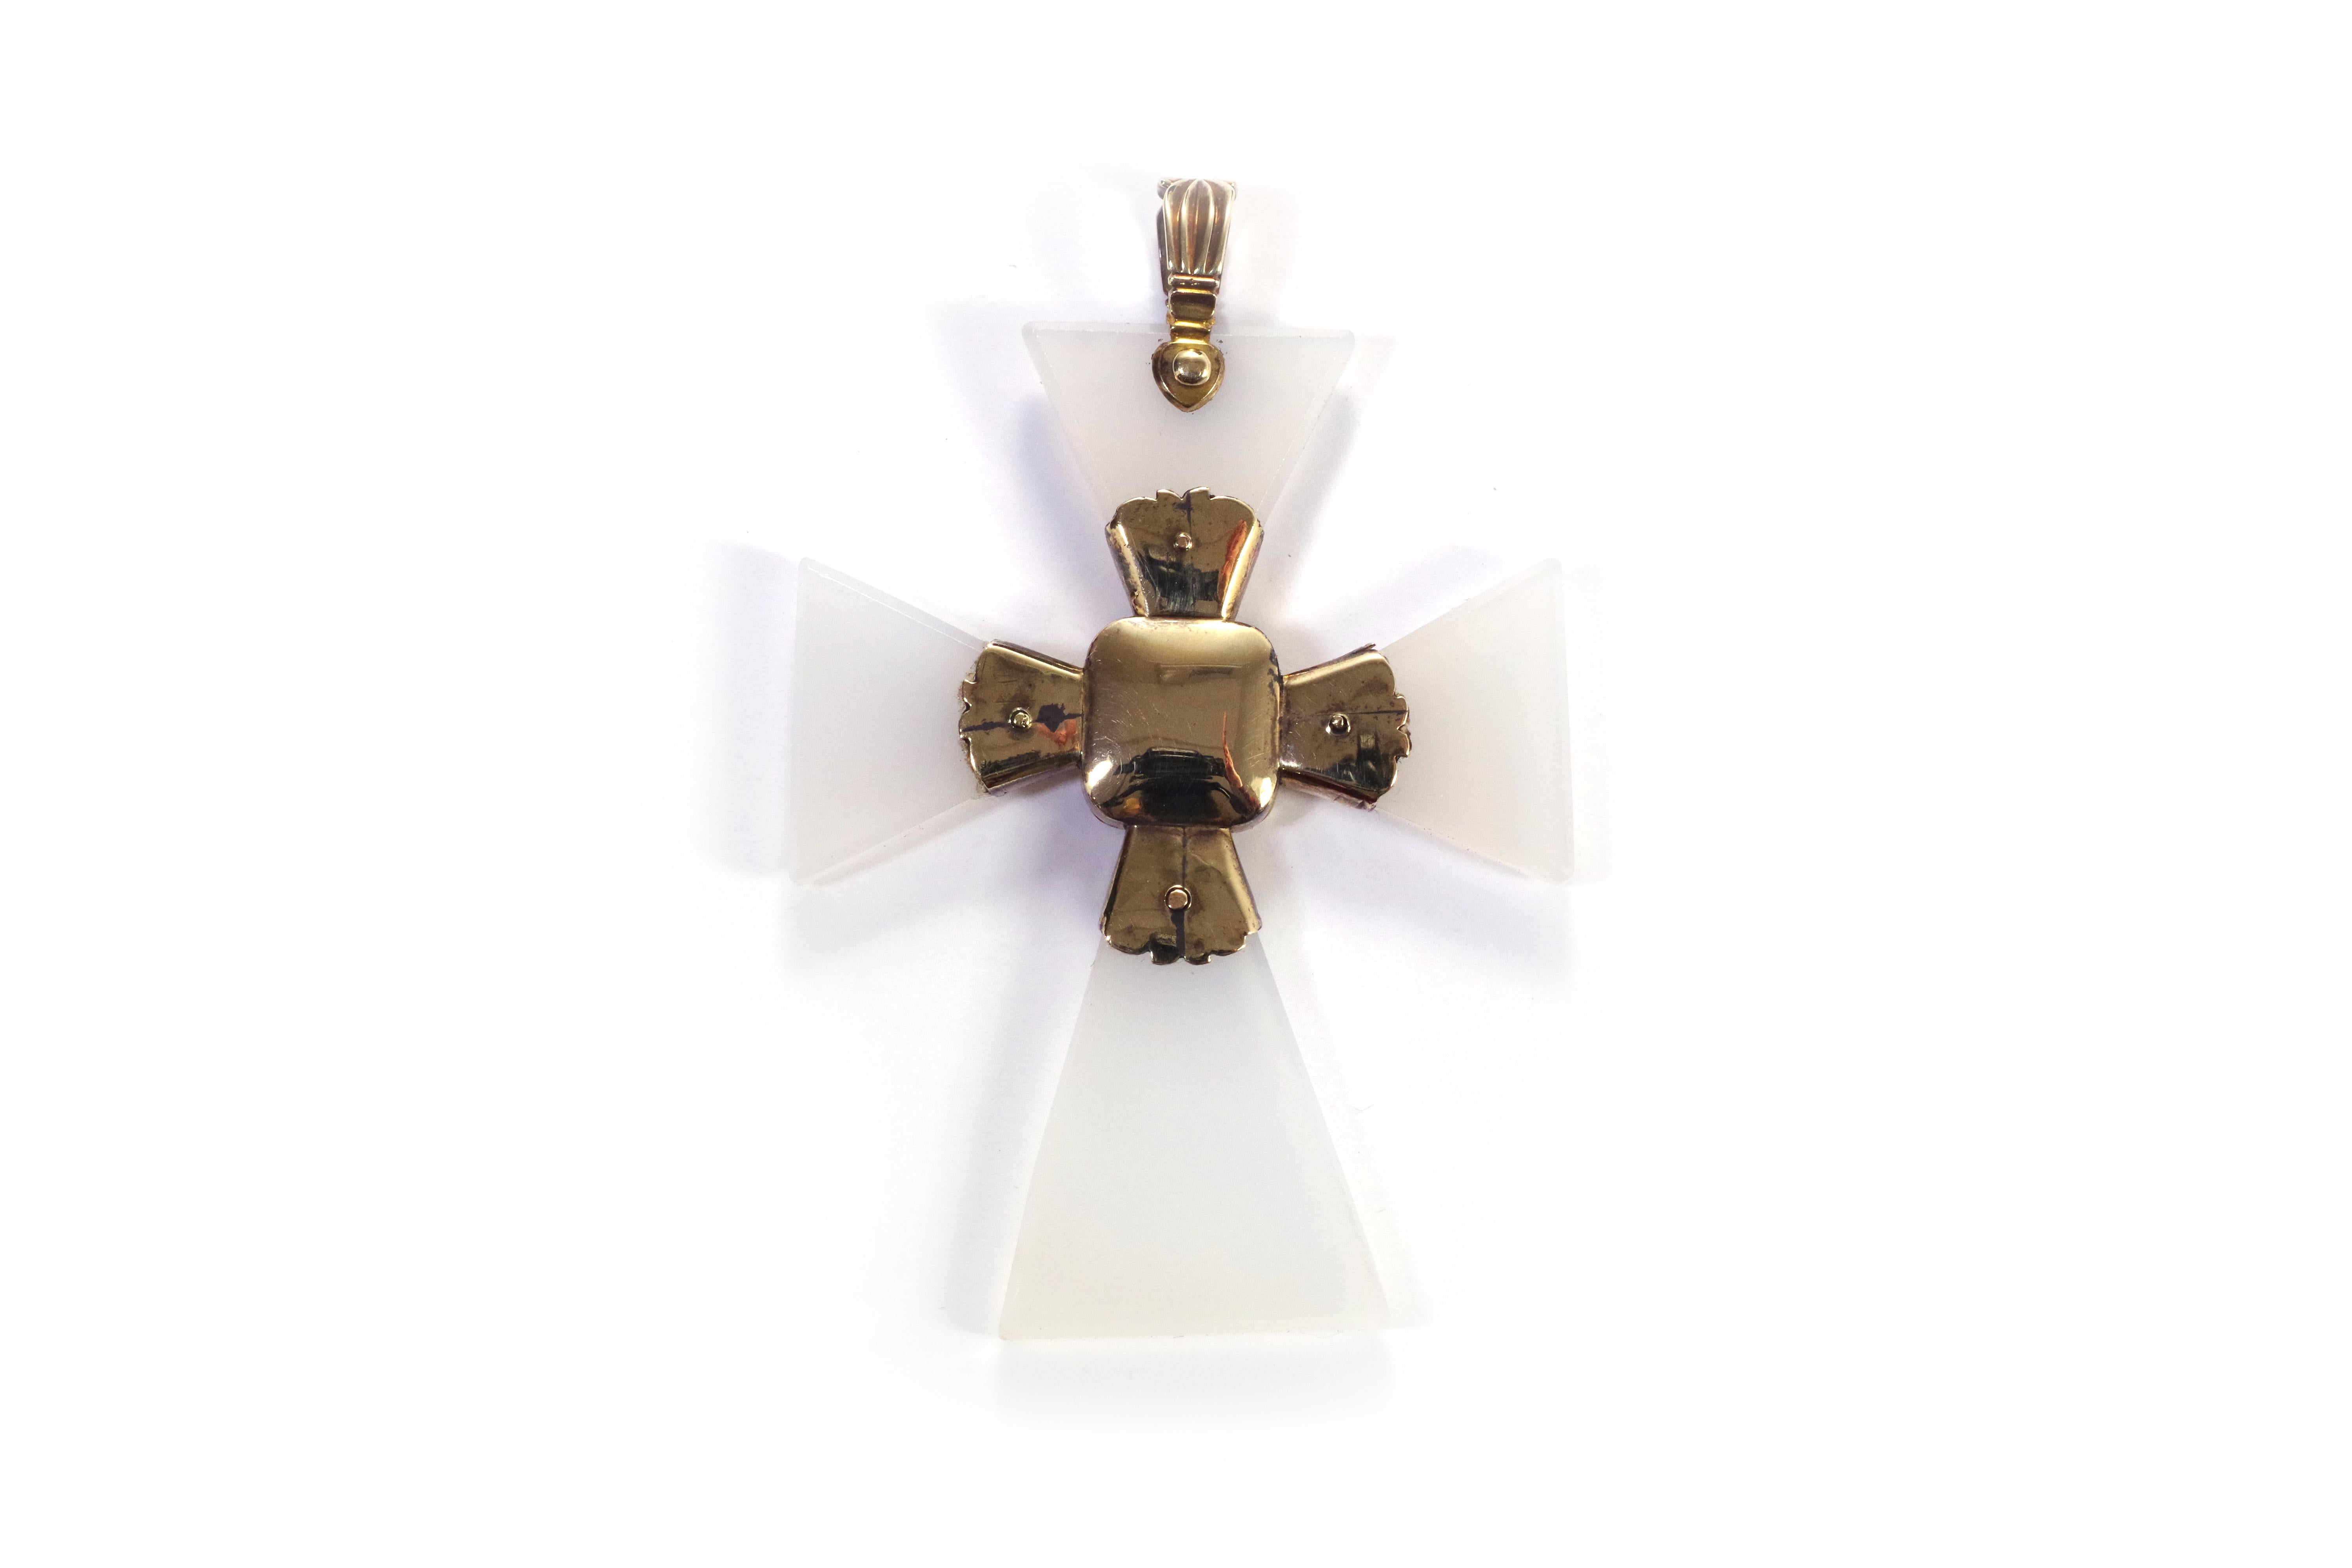 Georgian Maltese cross chalcedony pendant in 14k gold. This antique reliquary cross is made of four chalcedony elements forming a cross, held together by a central gold element with delicate engraving. This central element likely originally